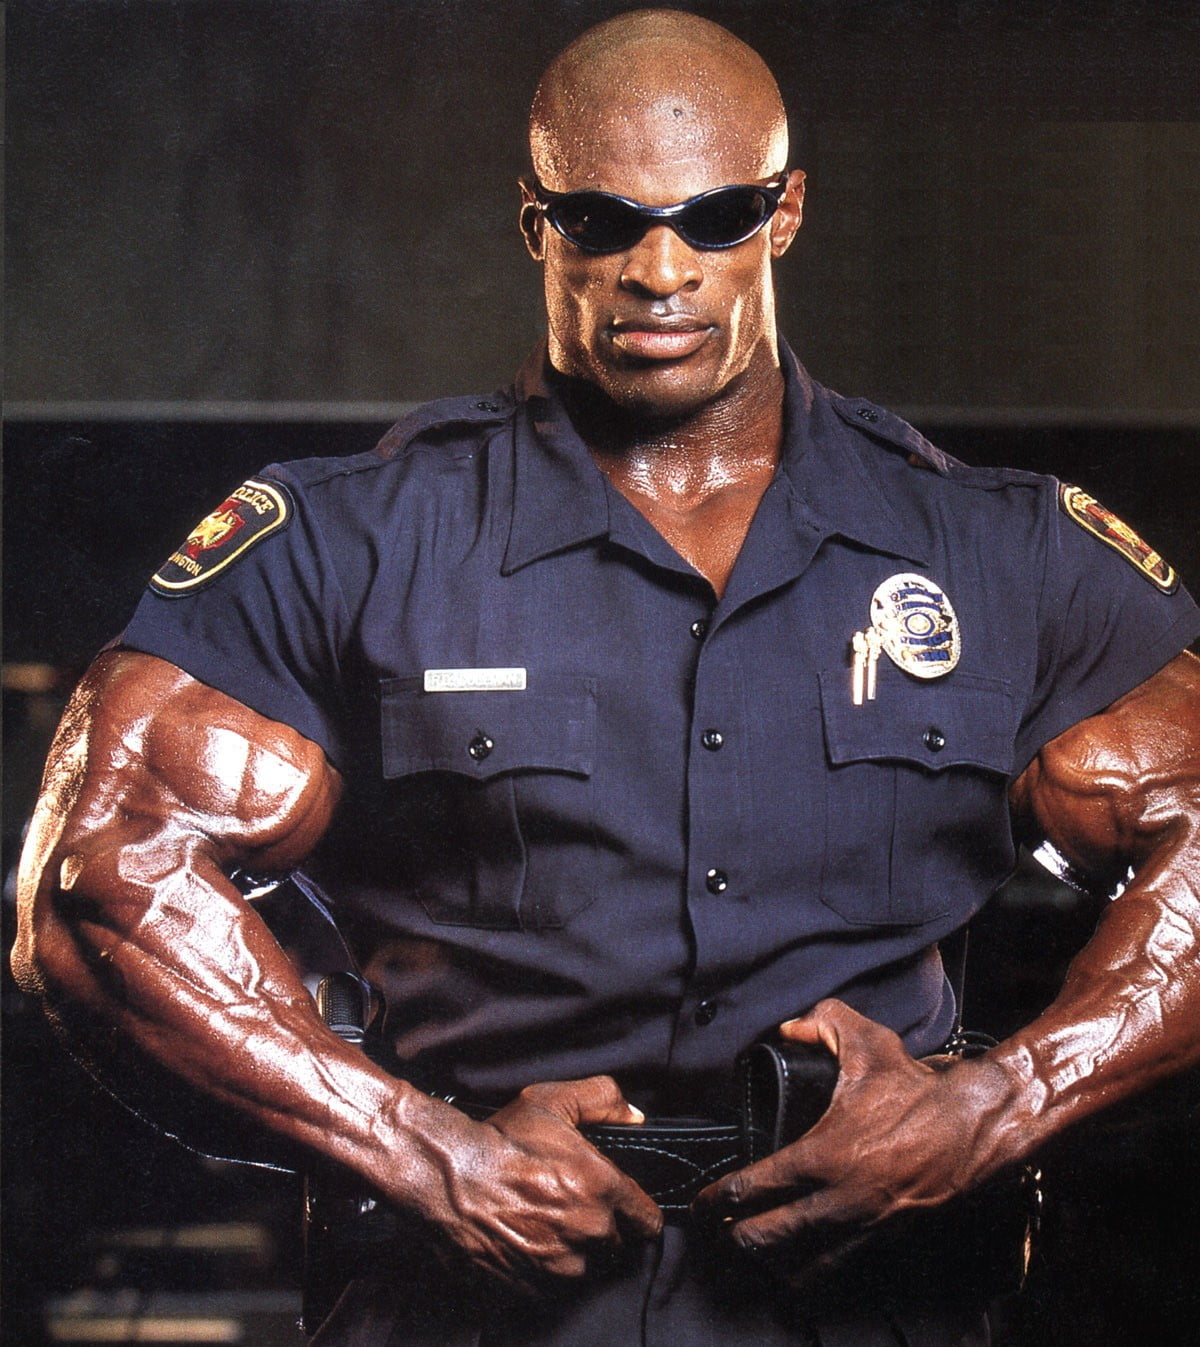 casualties In front of you Hostile Men's blue officer's uniform, men, police, Ronnie Coleman HD wallpaper |  Wallpaper Flare